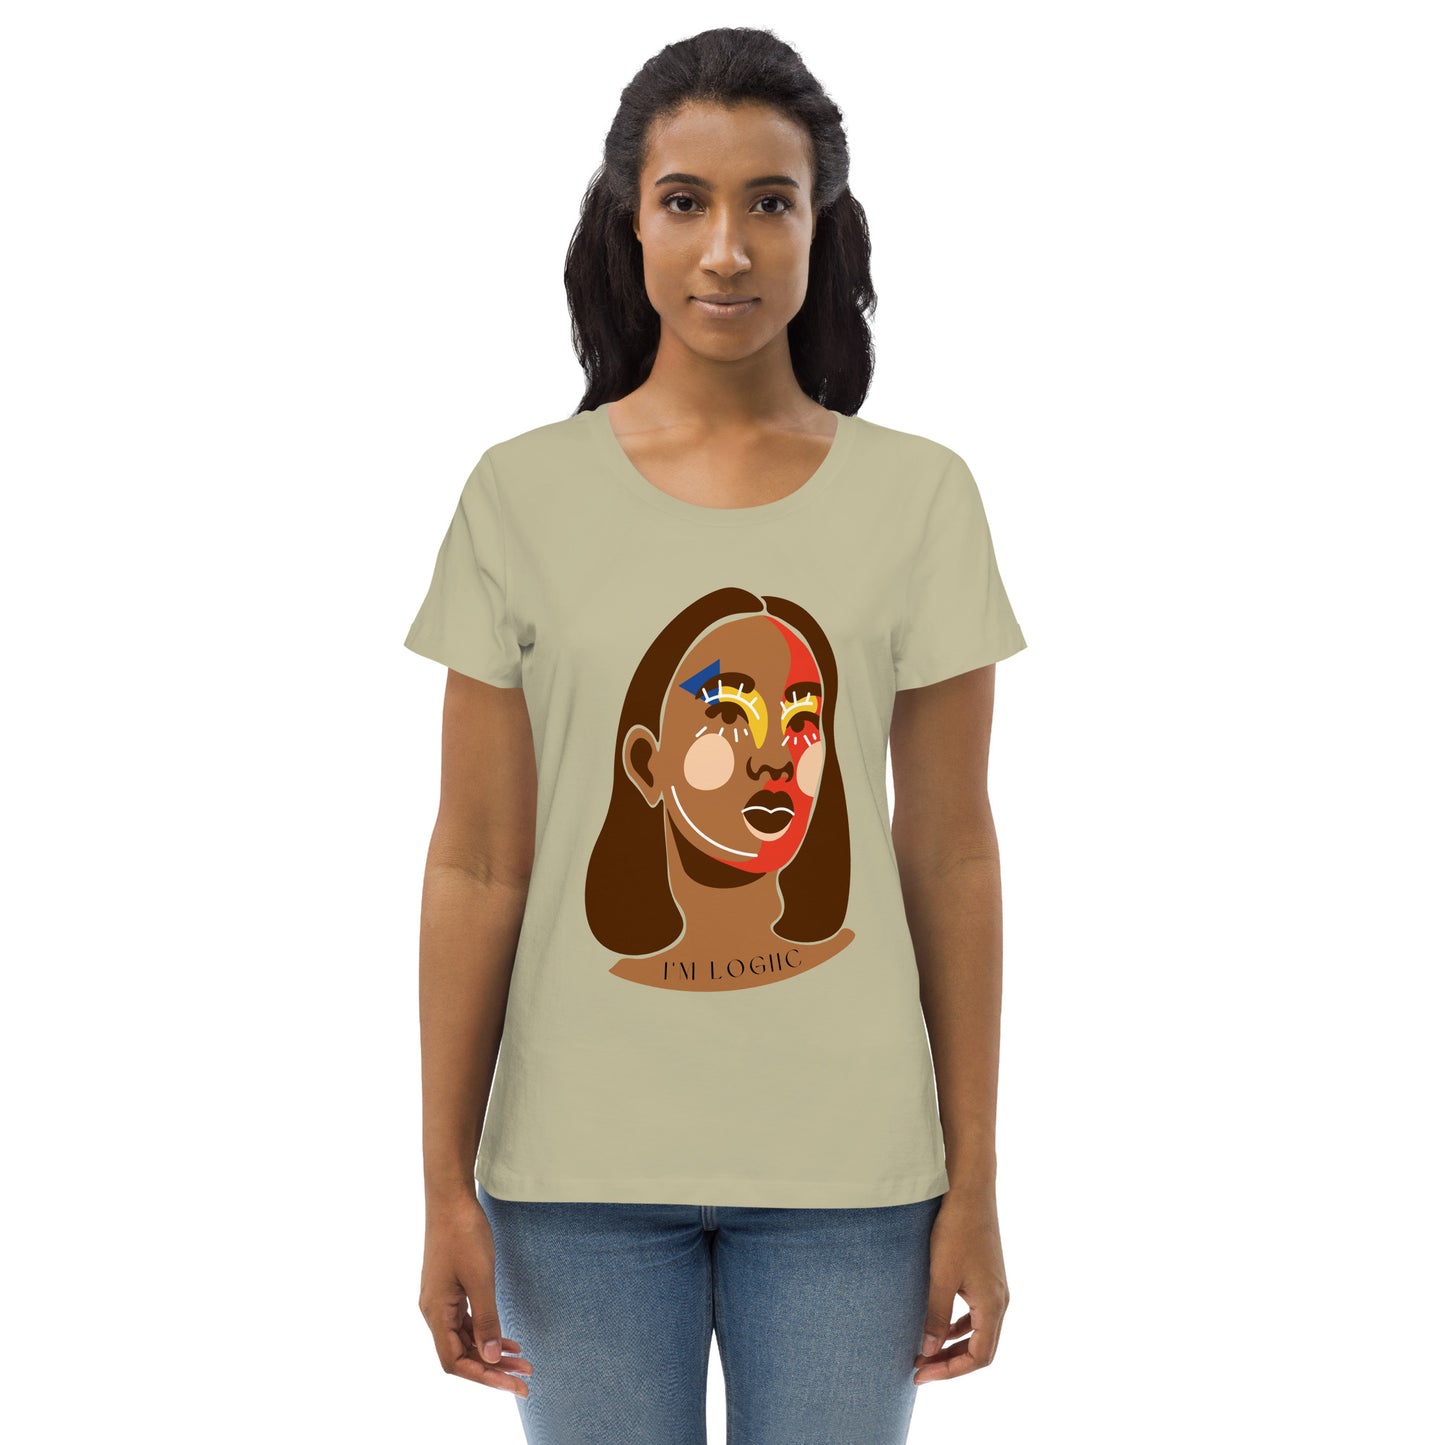 Women of God fitted eco tee